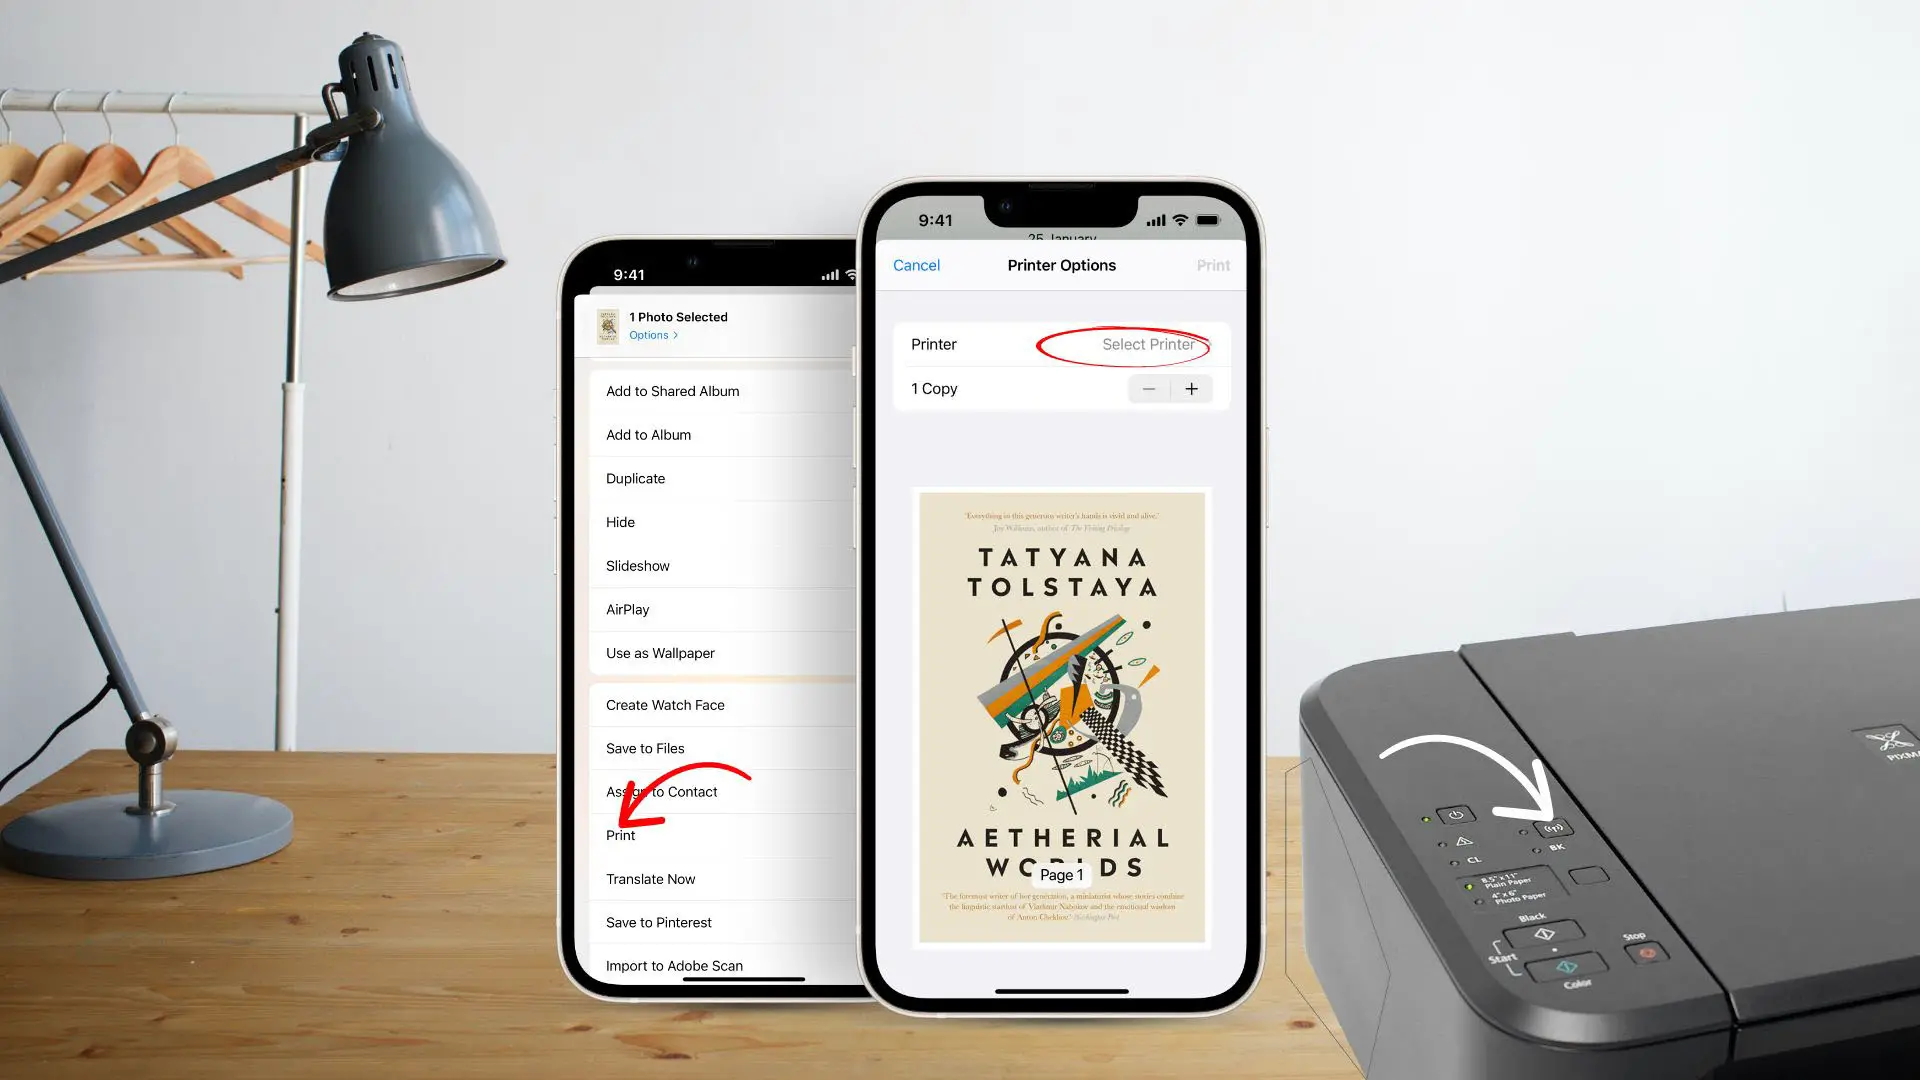 Connect Canon printer to iPhone with Airprint function